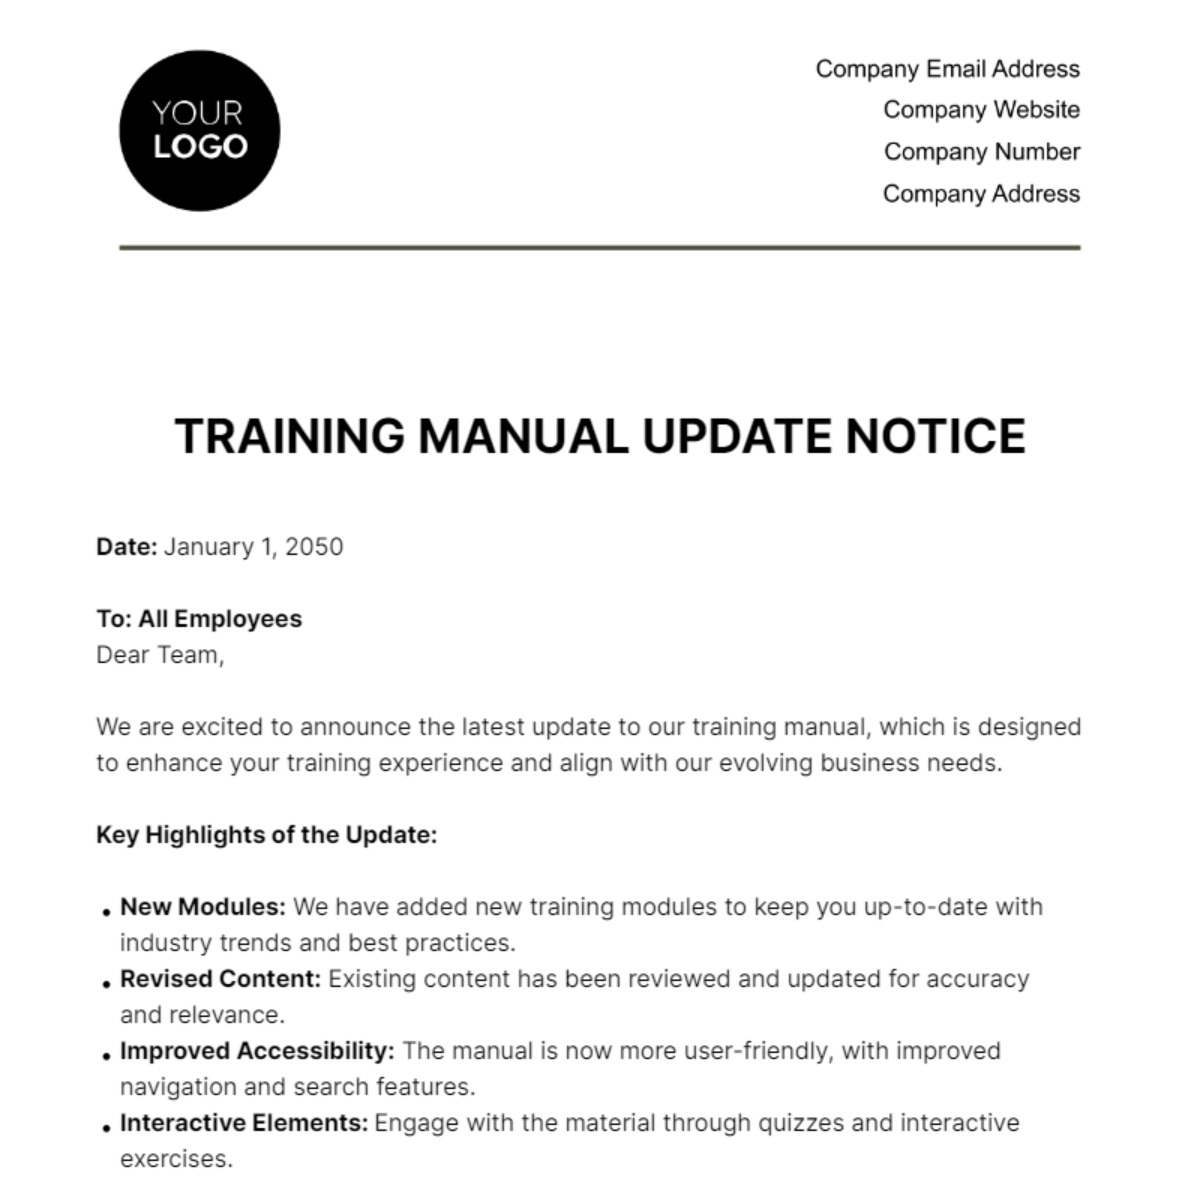 Free Training Manual Update Notice HR Template